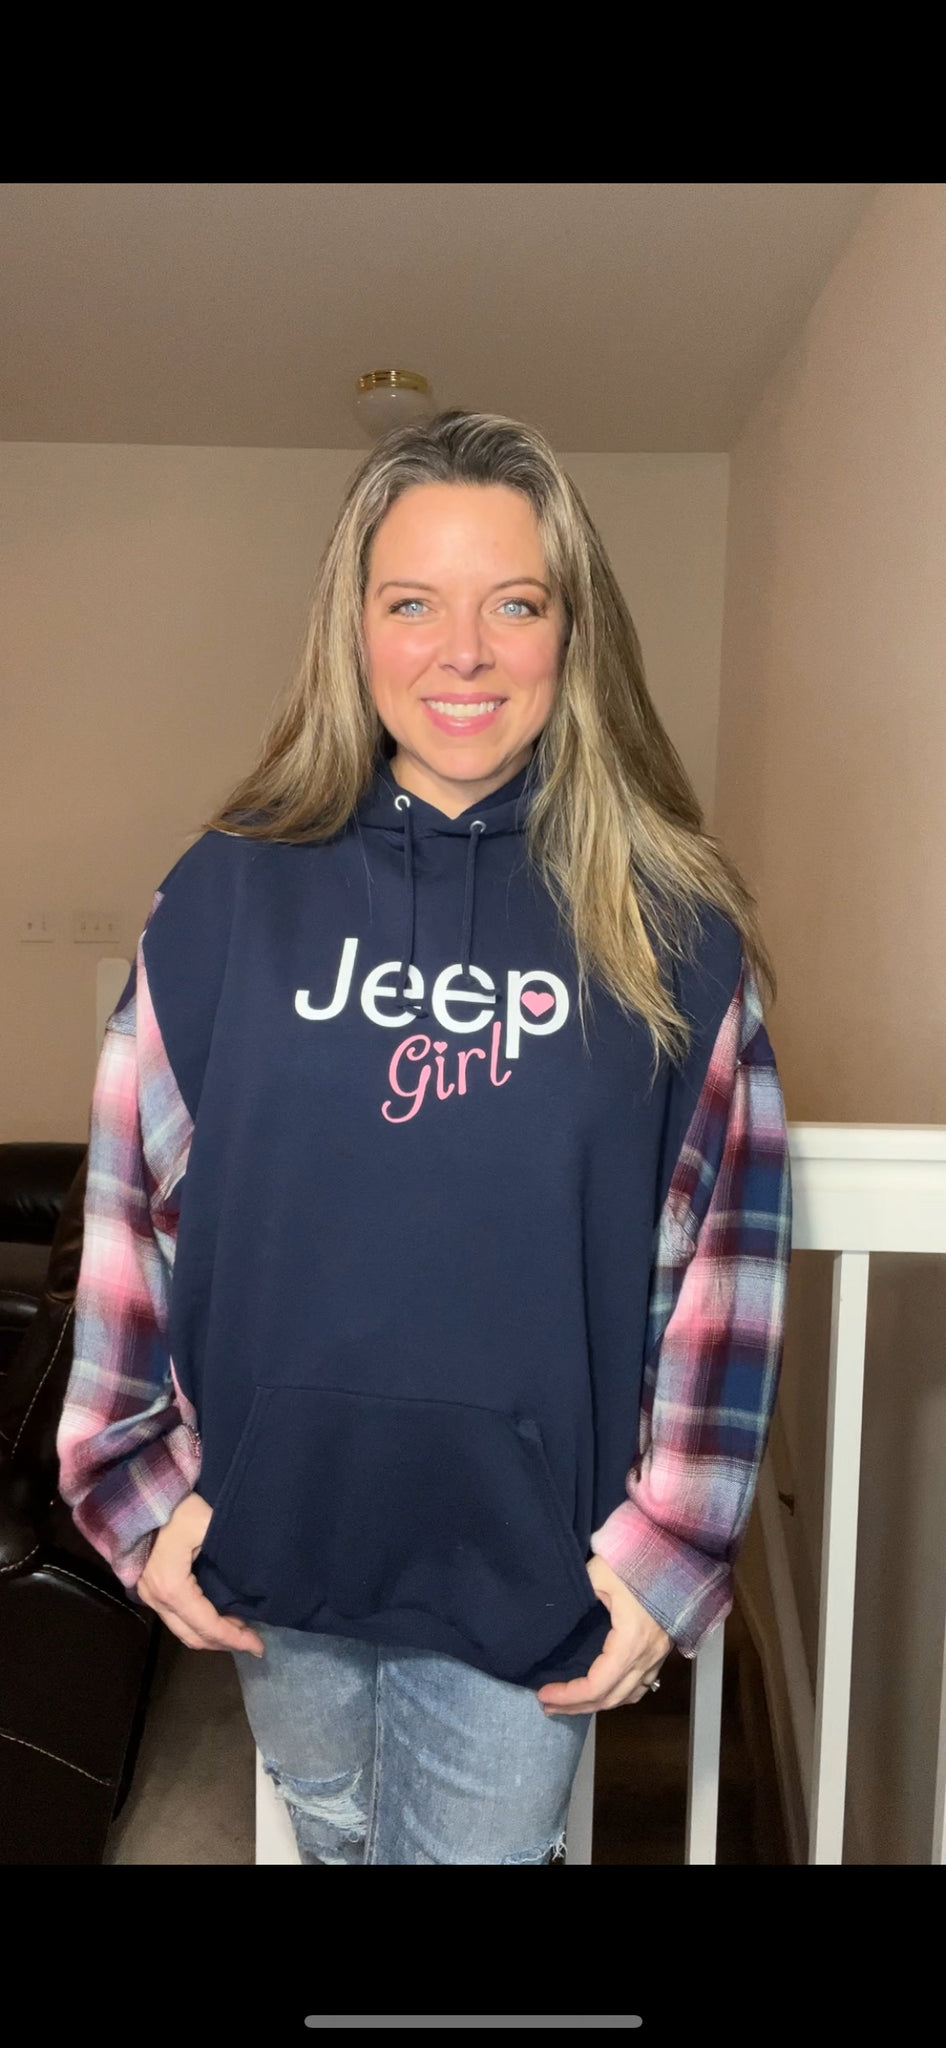 Jeep Girl - woman’s 3X - thick sweatshirt with flannel sleeves ￼